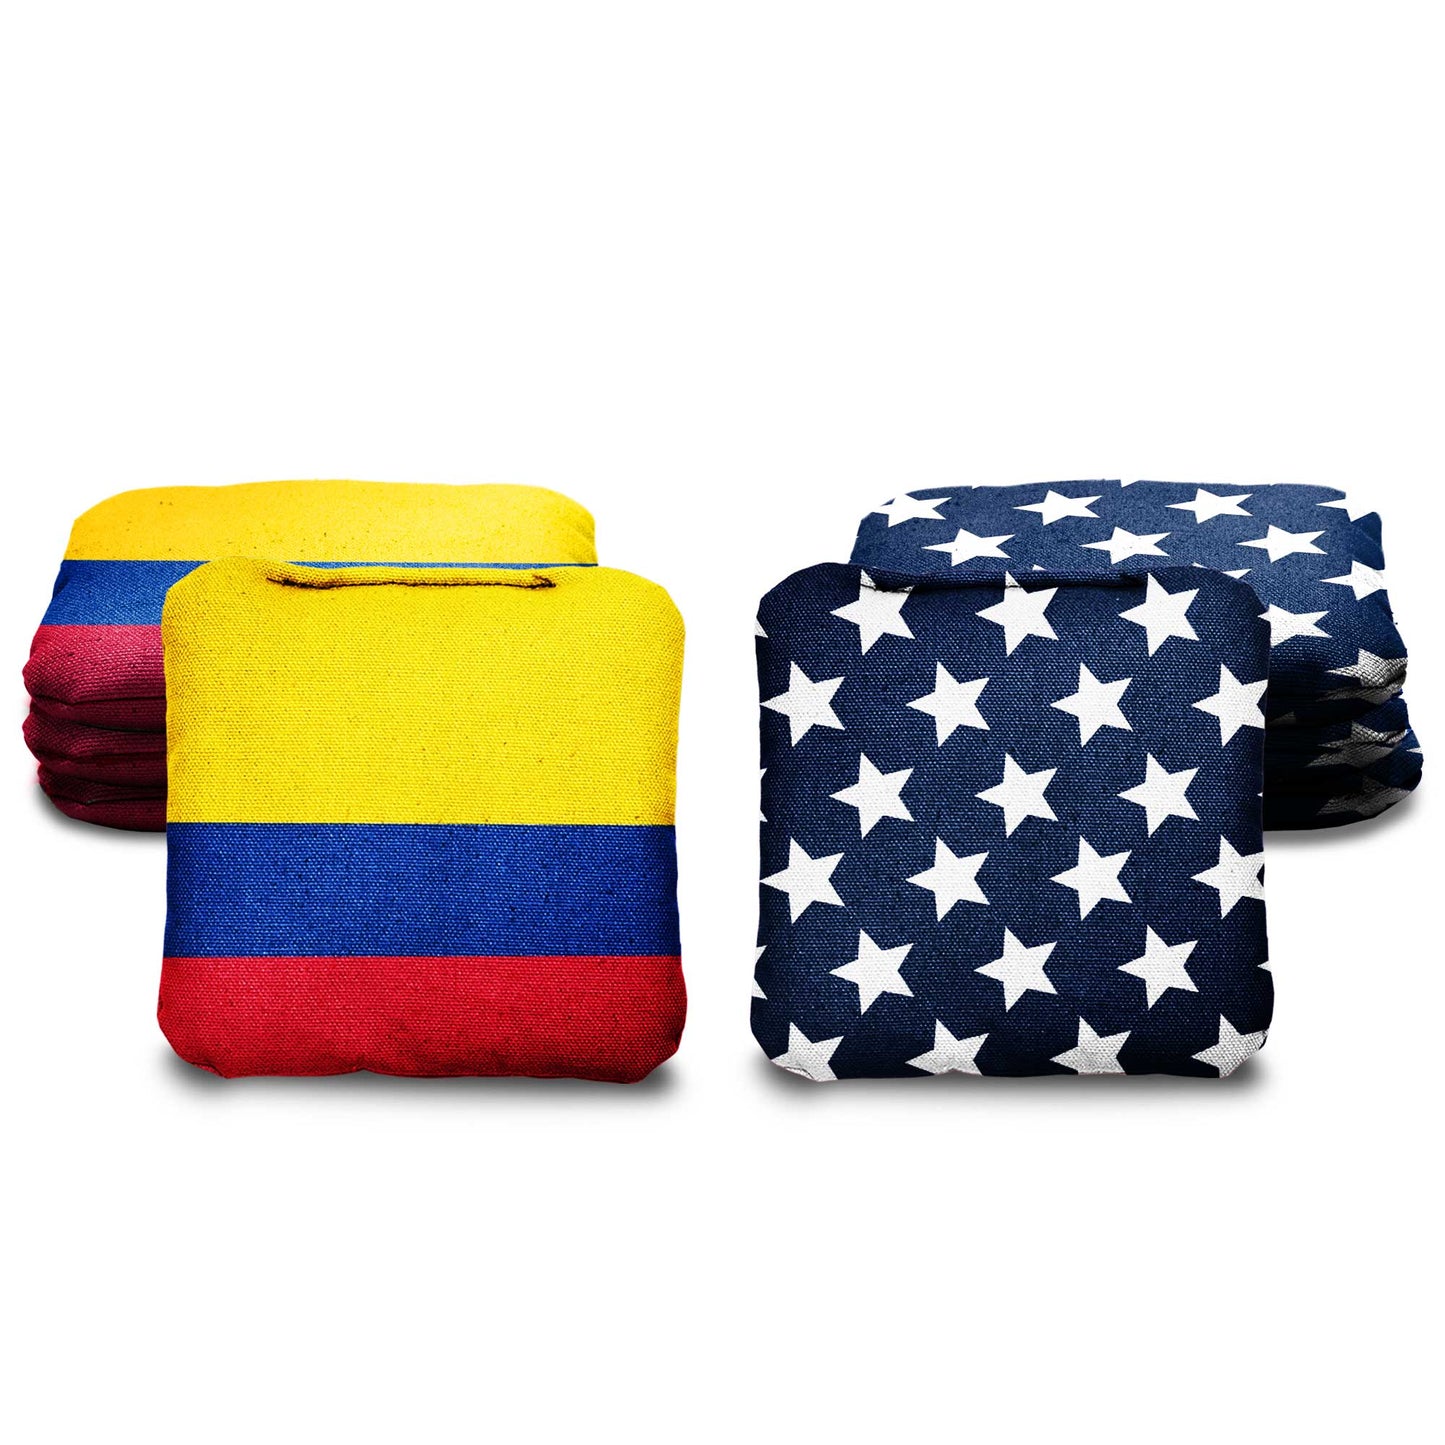 The Columbians and Mericas - 8 Cornhole Bags